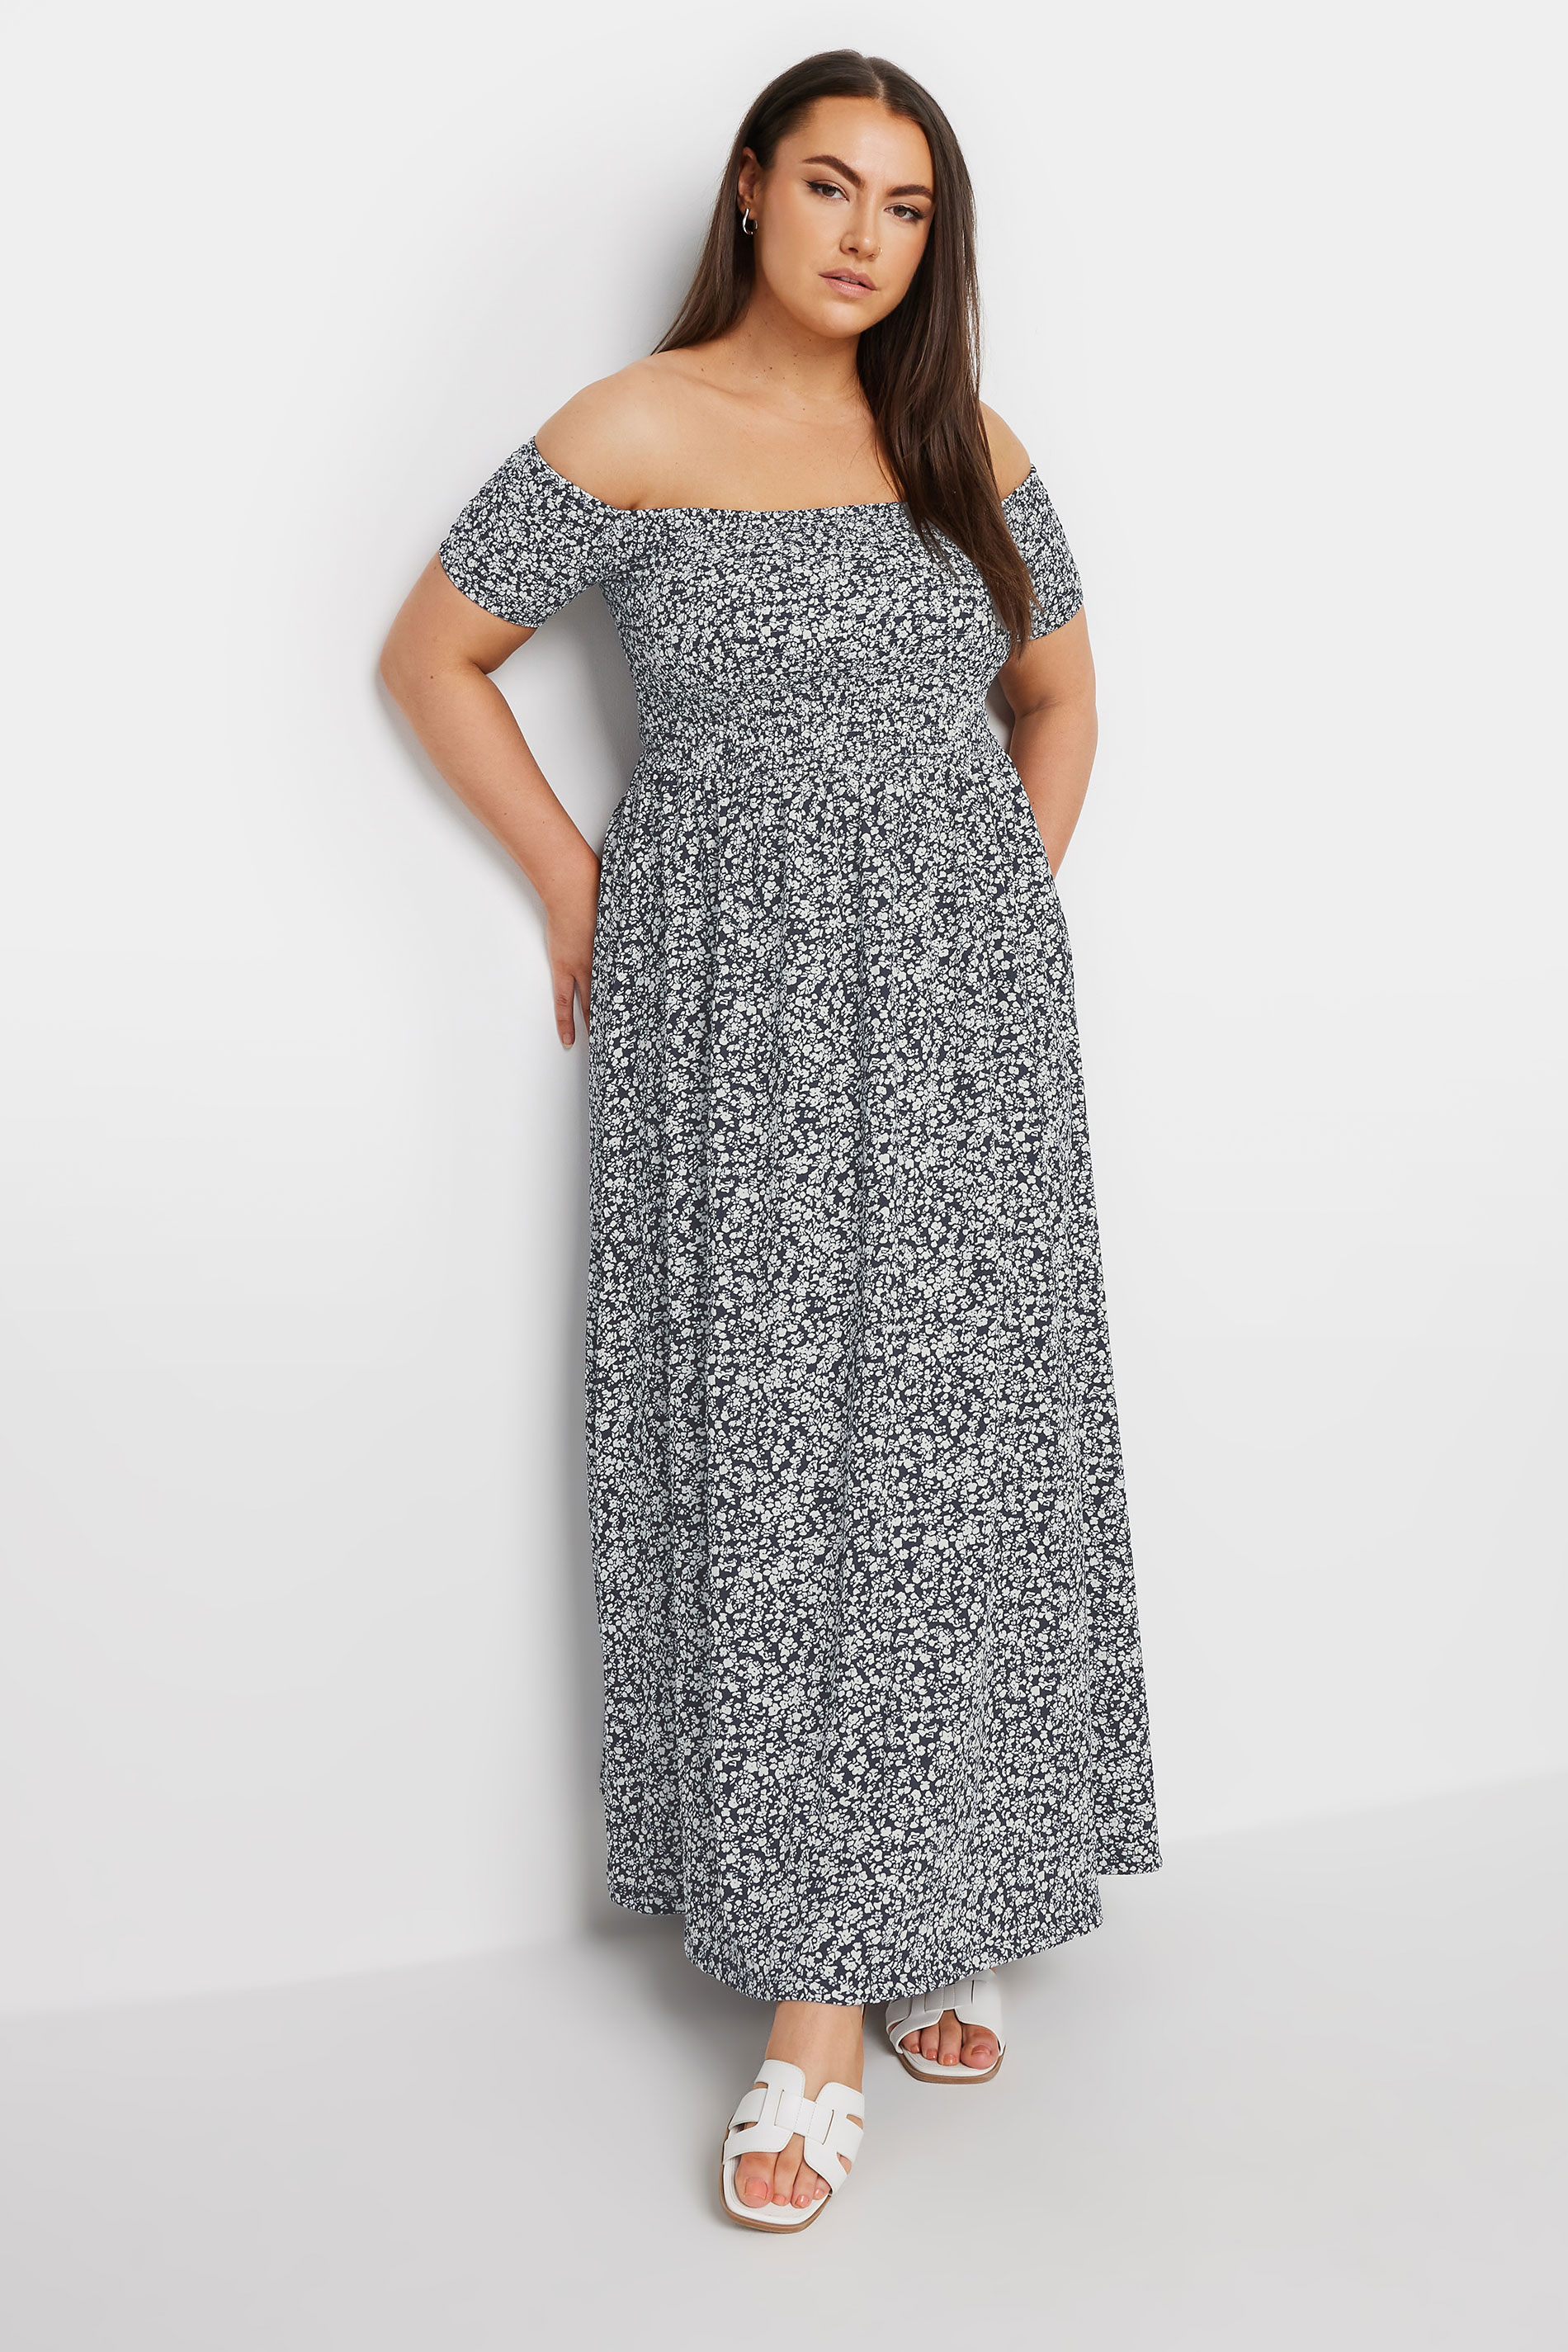 YOURS Plus Size Navy Blue Floral Print Bardot Midaxi Dress | Yours Clothing 1